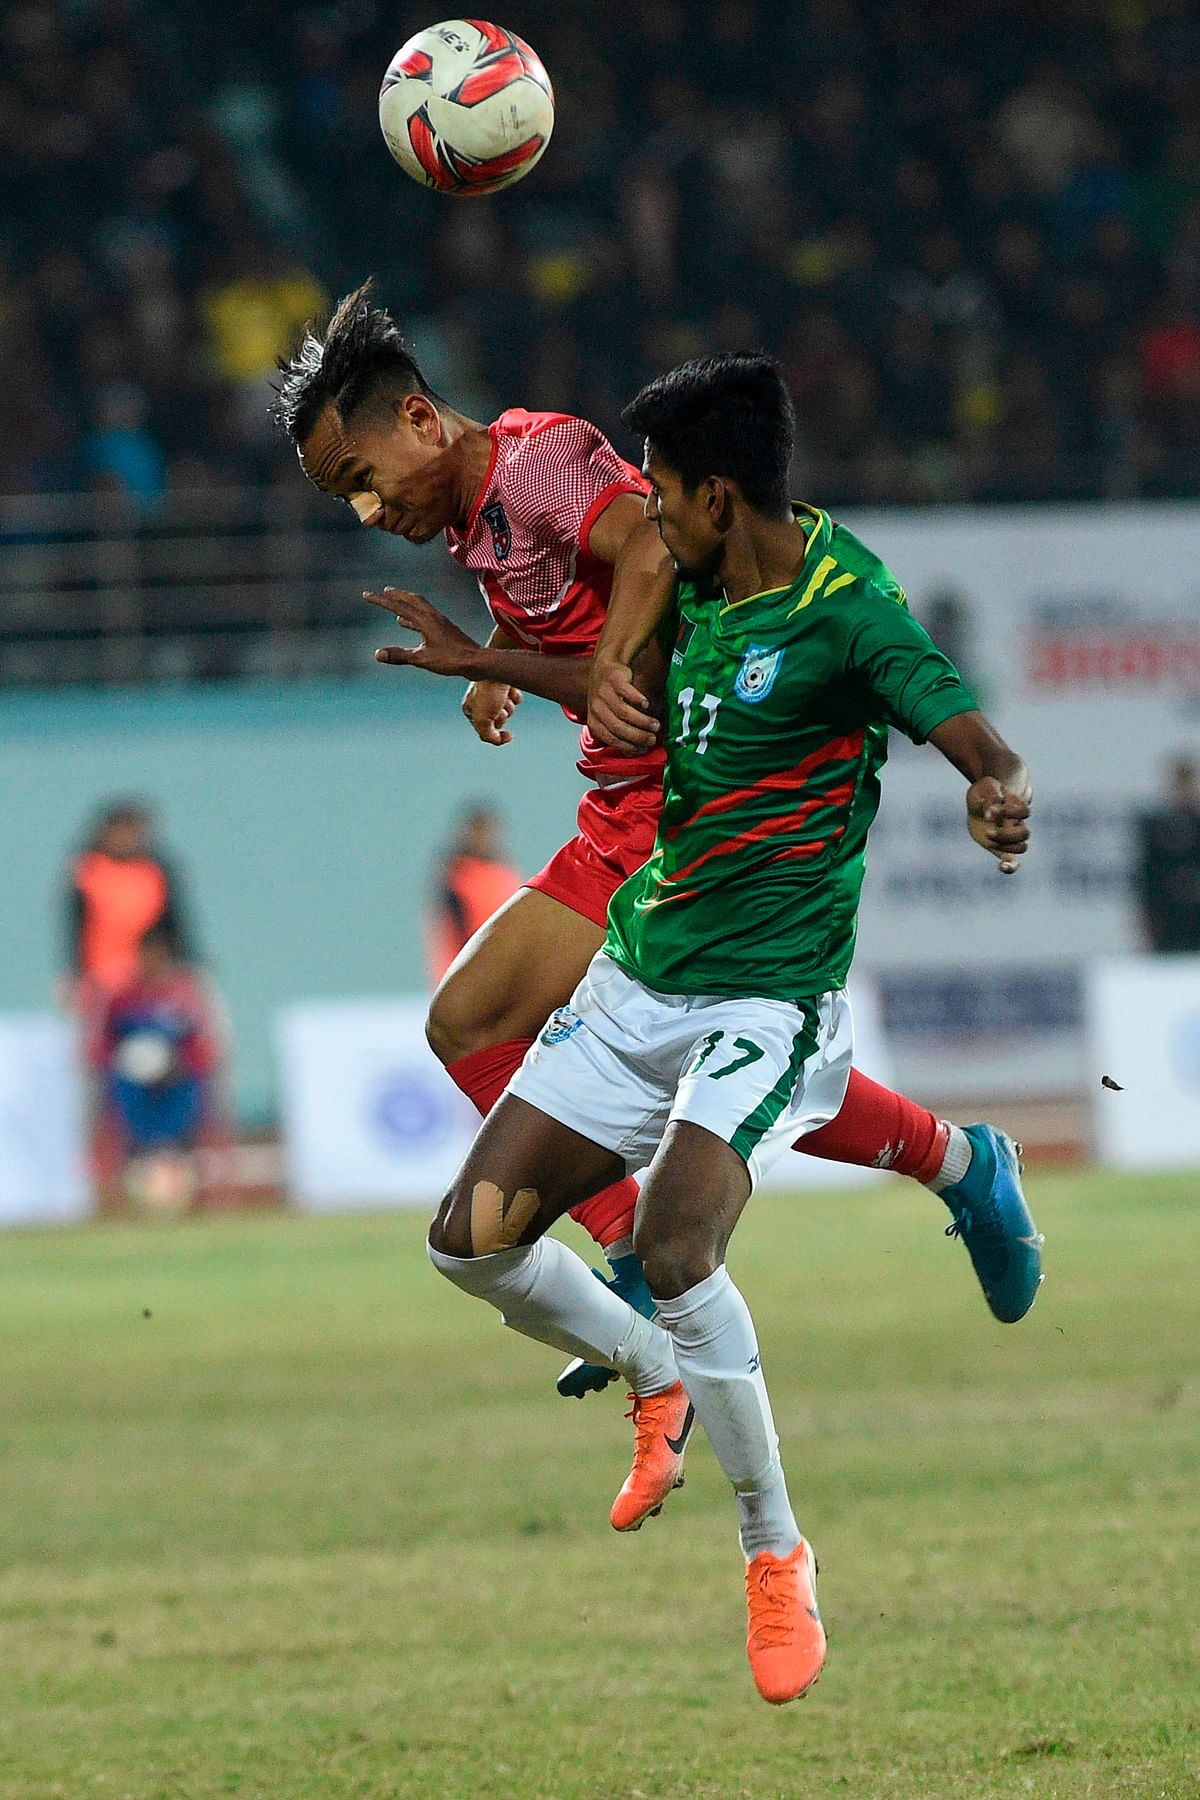 Nepal`s midfielder Sunil Bal (L) fights for the ball with Bangladesh`s defender Riyadul Hasan (R) during the football match between Nepal and Bangladesh at the 13th South Asian Games (SAG) in Kathmandu on 8 December 2019. Photo: AFP